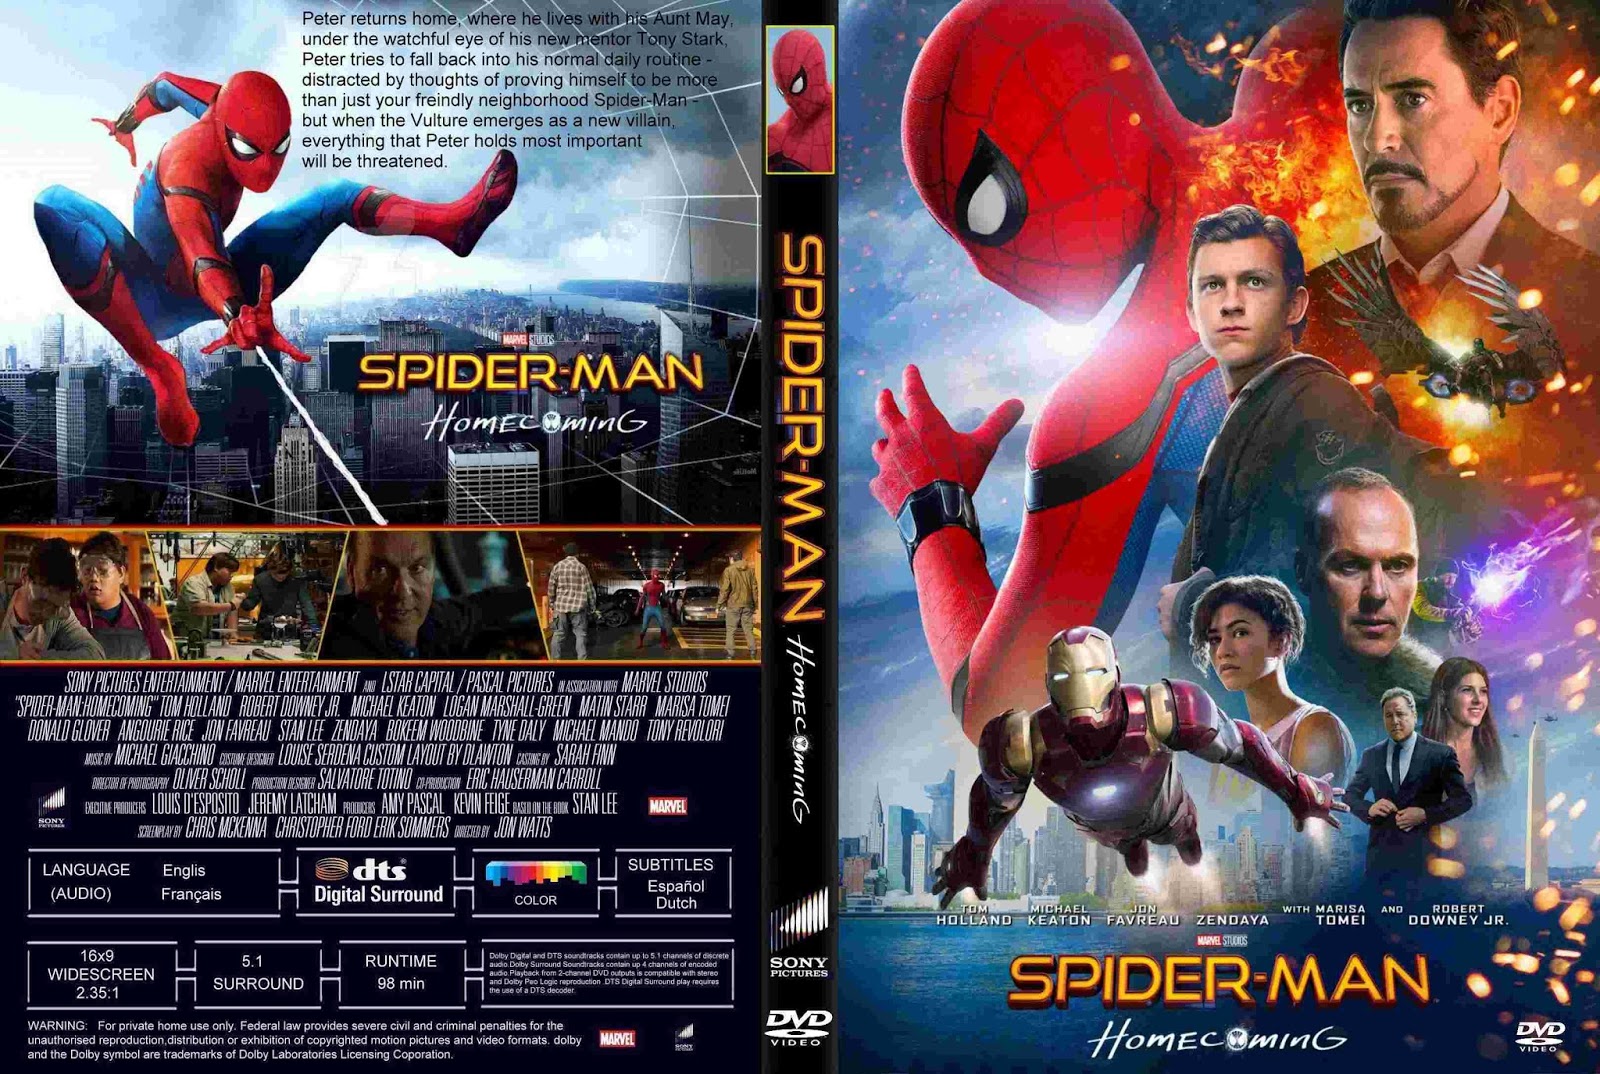 Spider-Man Homecoming (2017) R1 - Cover & Label DVD Movie.